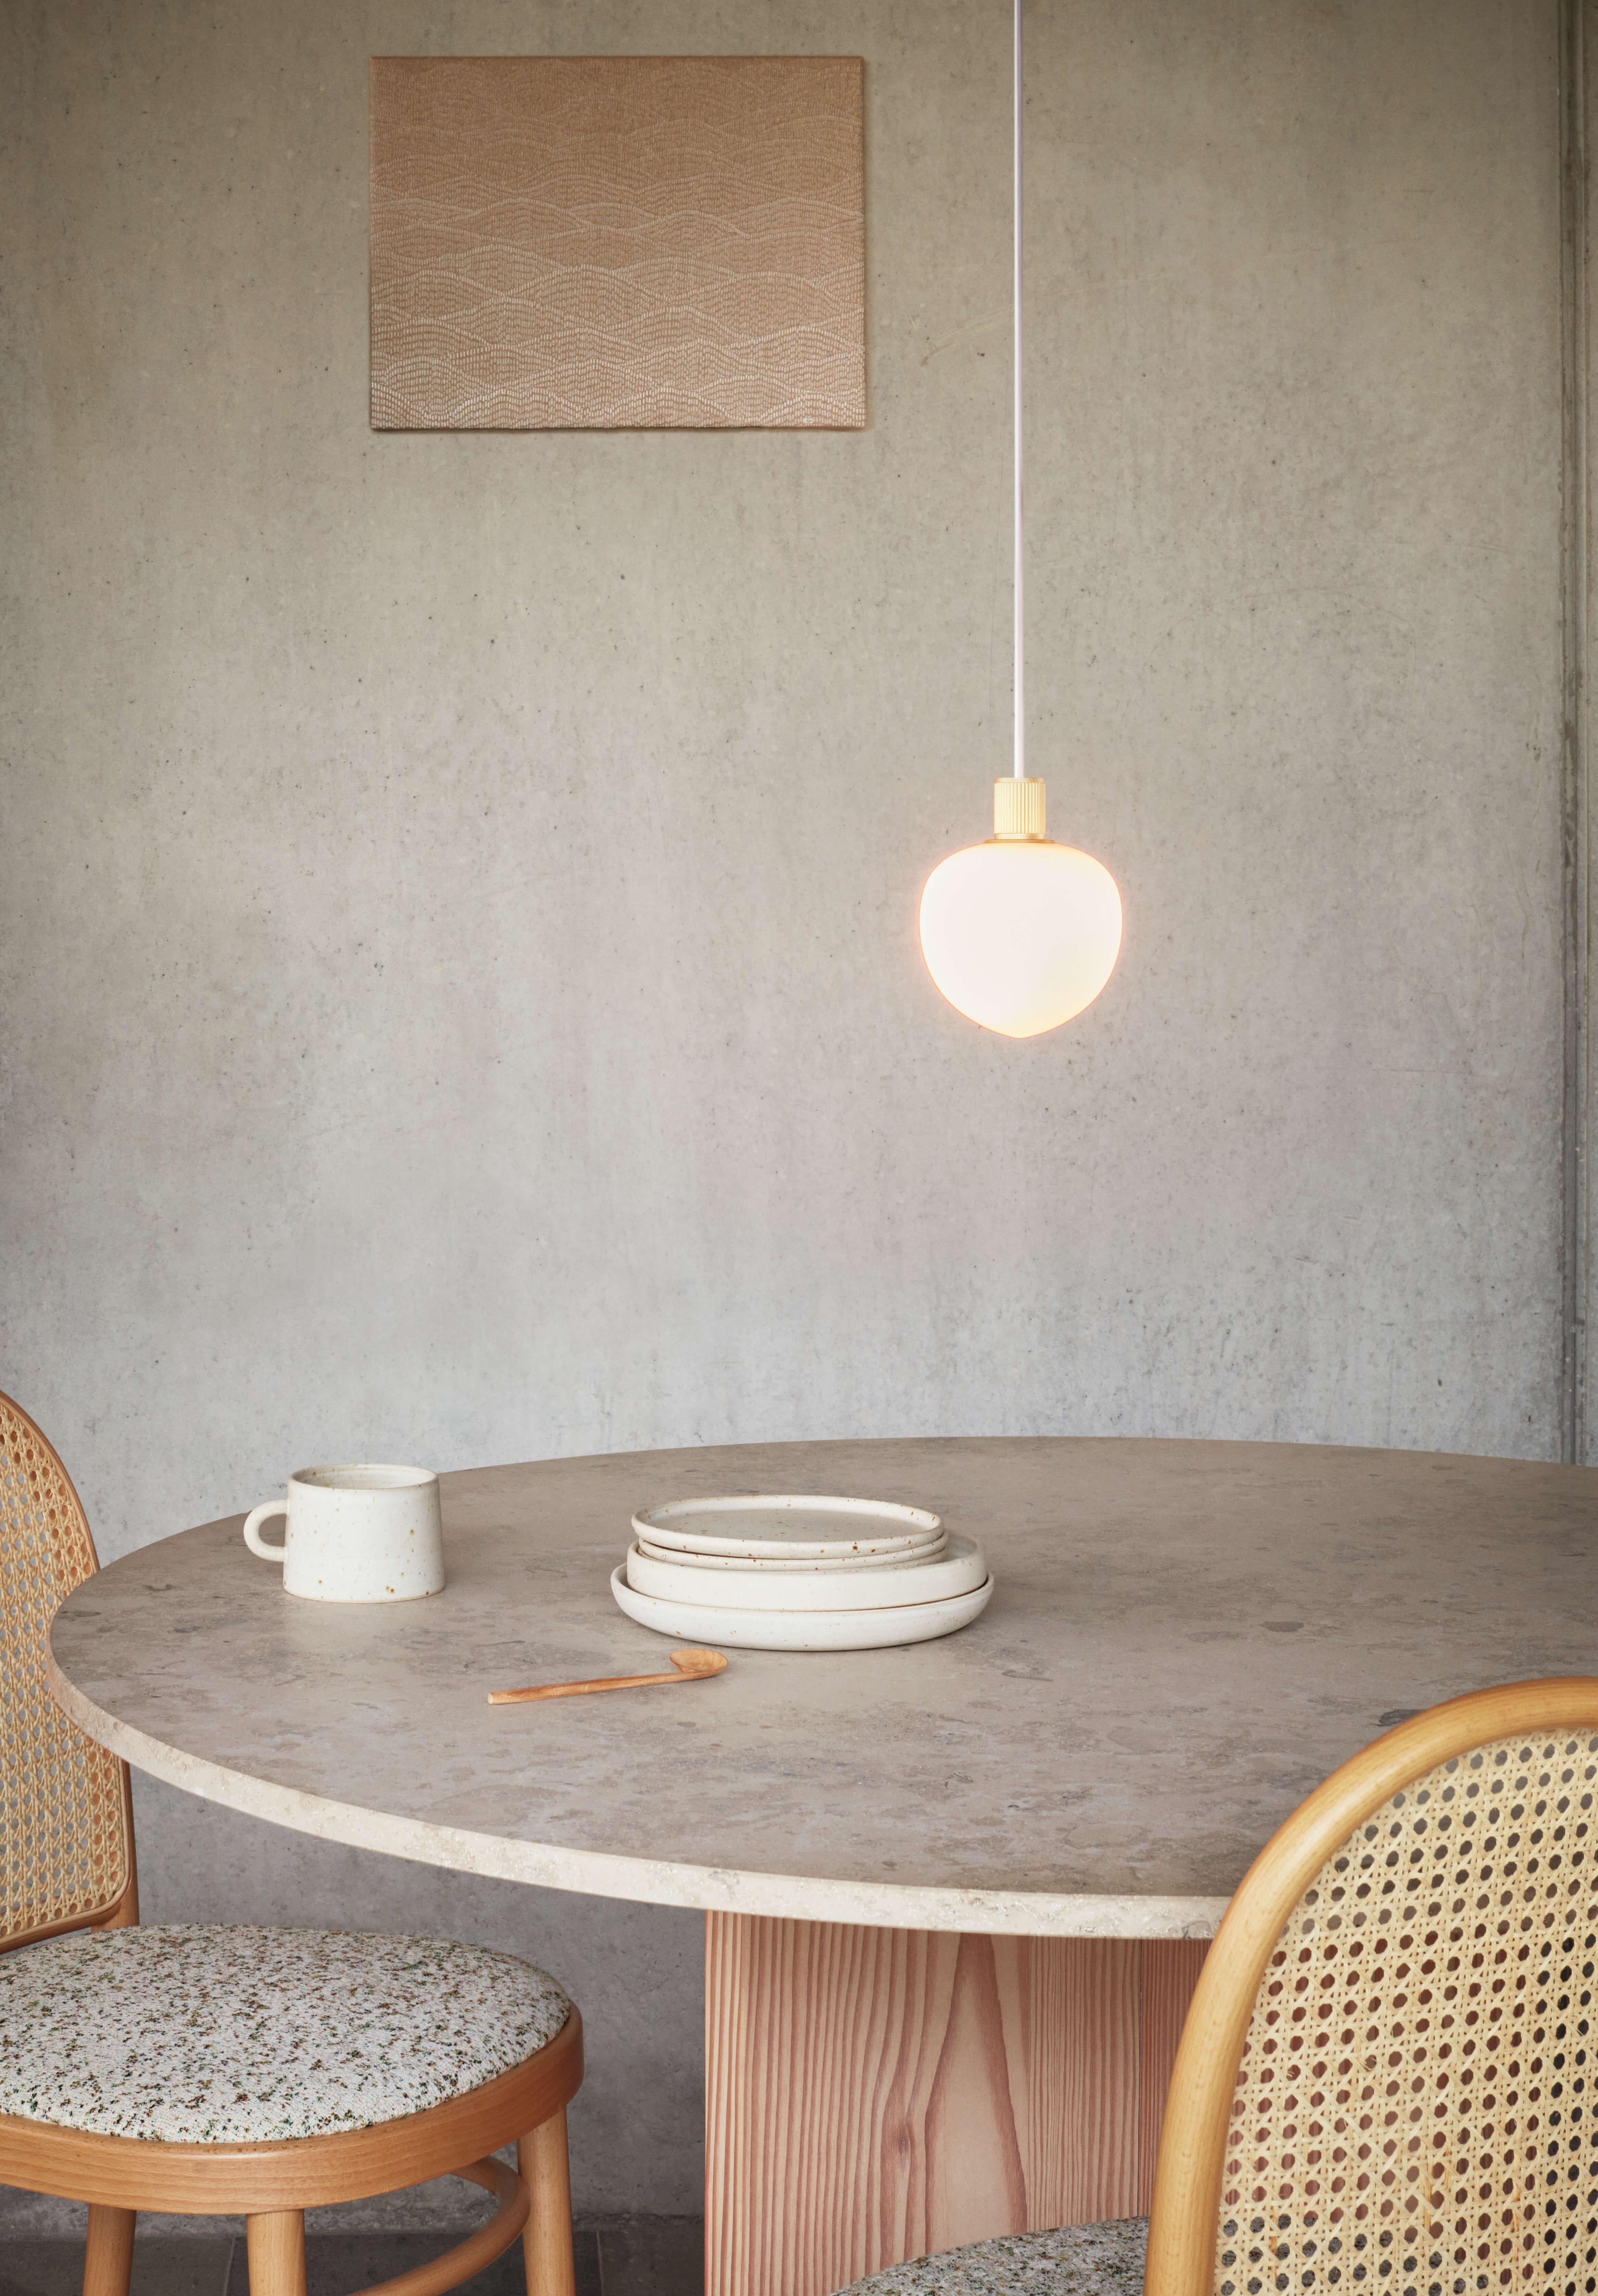 Memoir 120 Pendant Lamp signed by GamFratesi for LYFA.

DIMENSIONS
W 12 x D 12 x H 16.8 cm

COLOURS
Black or brass

Textile wire (white) 600cm
Socket: G9
Max wattage: 28 Watt
Energy class: The luminaire is compatible with bulbs of energy classes A++